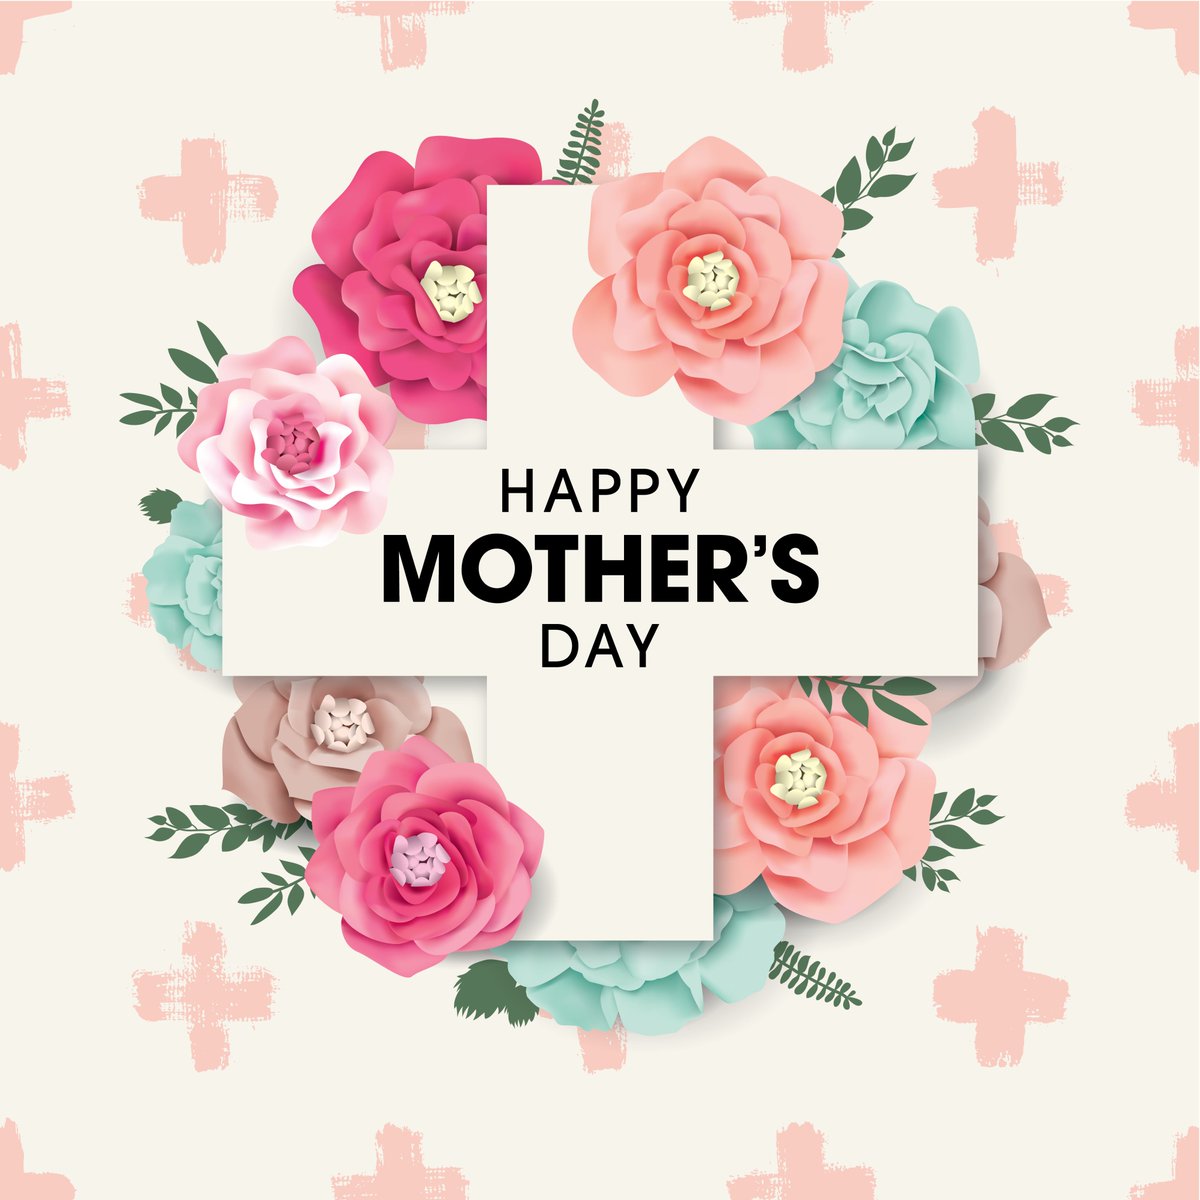 One day isn’t enough to celebrate all you do. Happy Mother’s Day from #InSyncPLUS